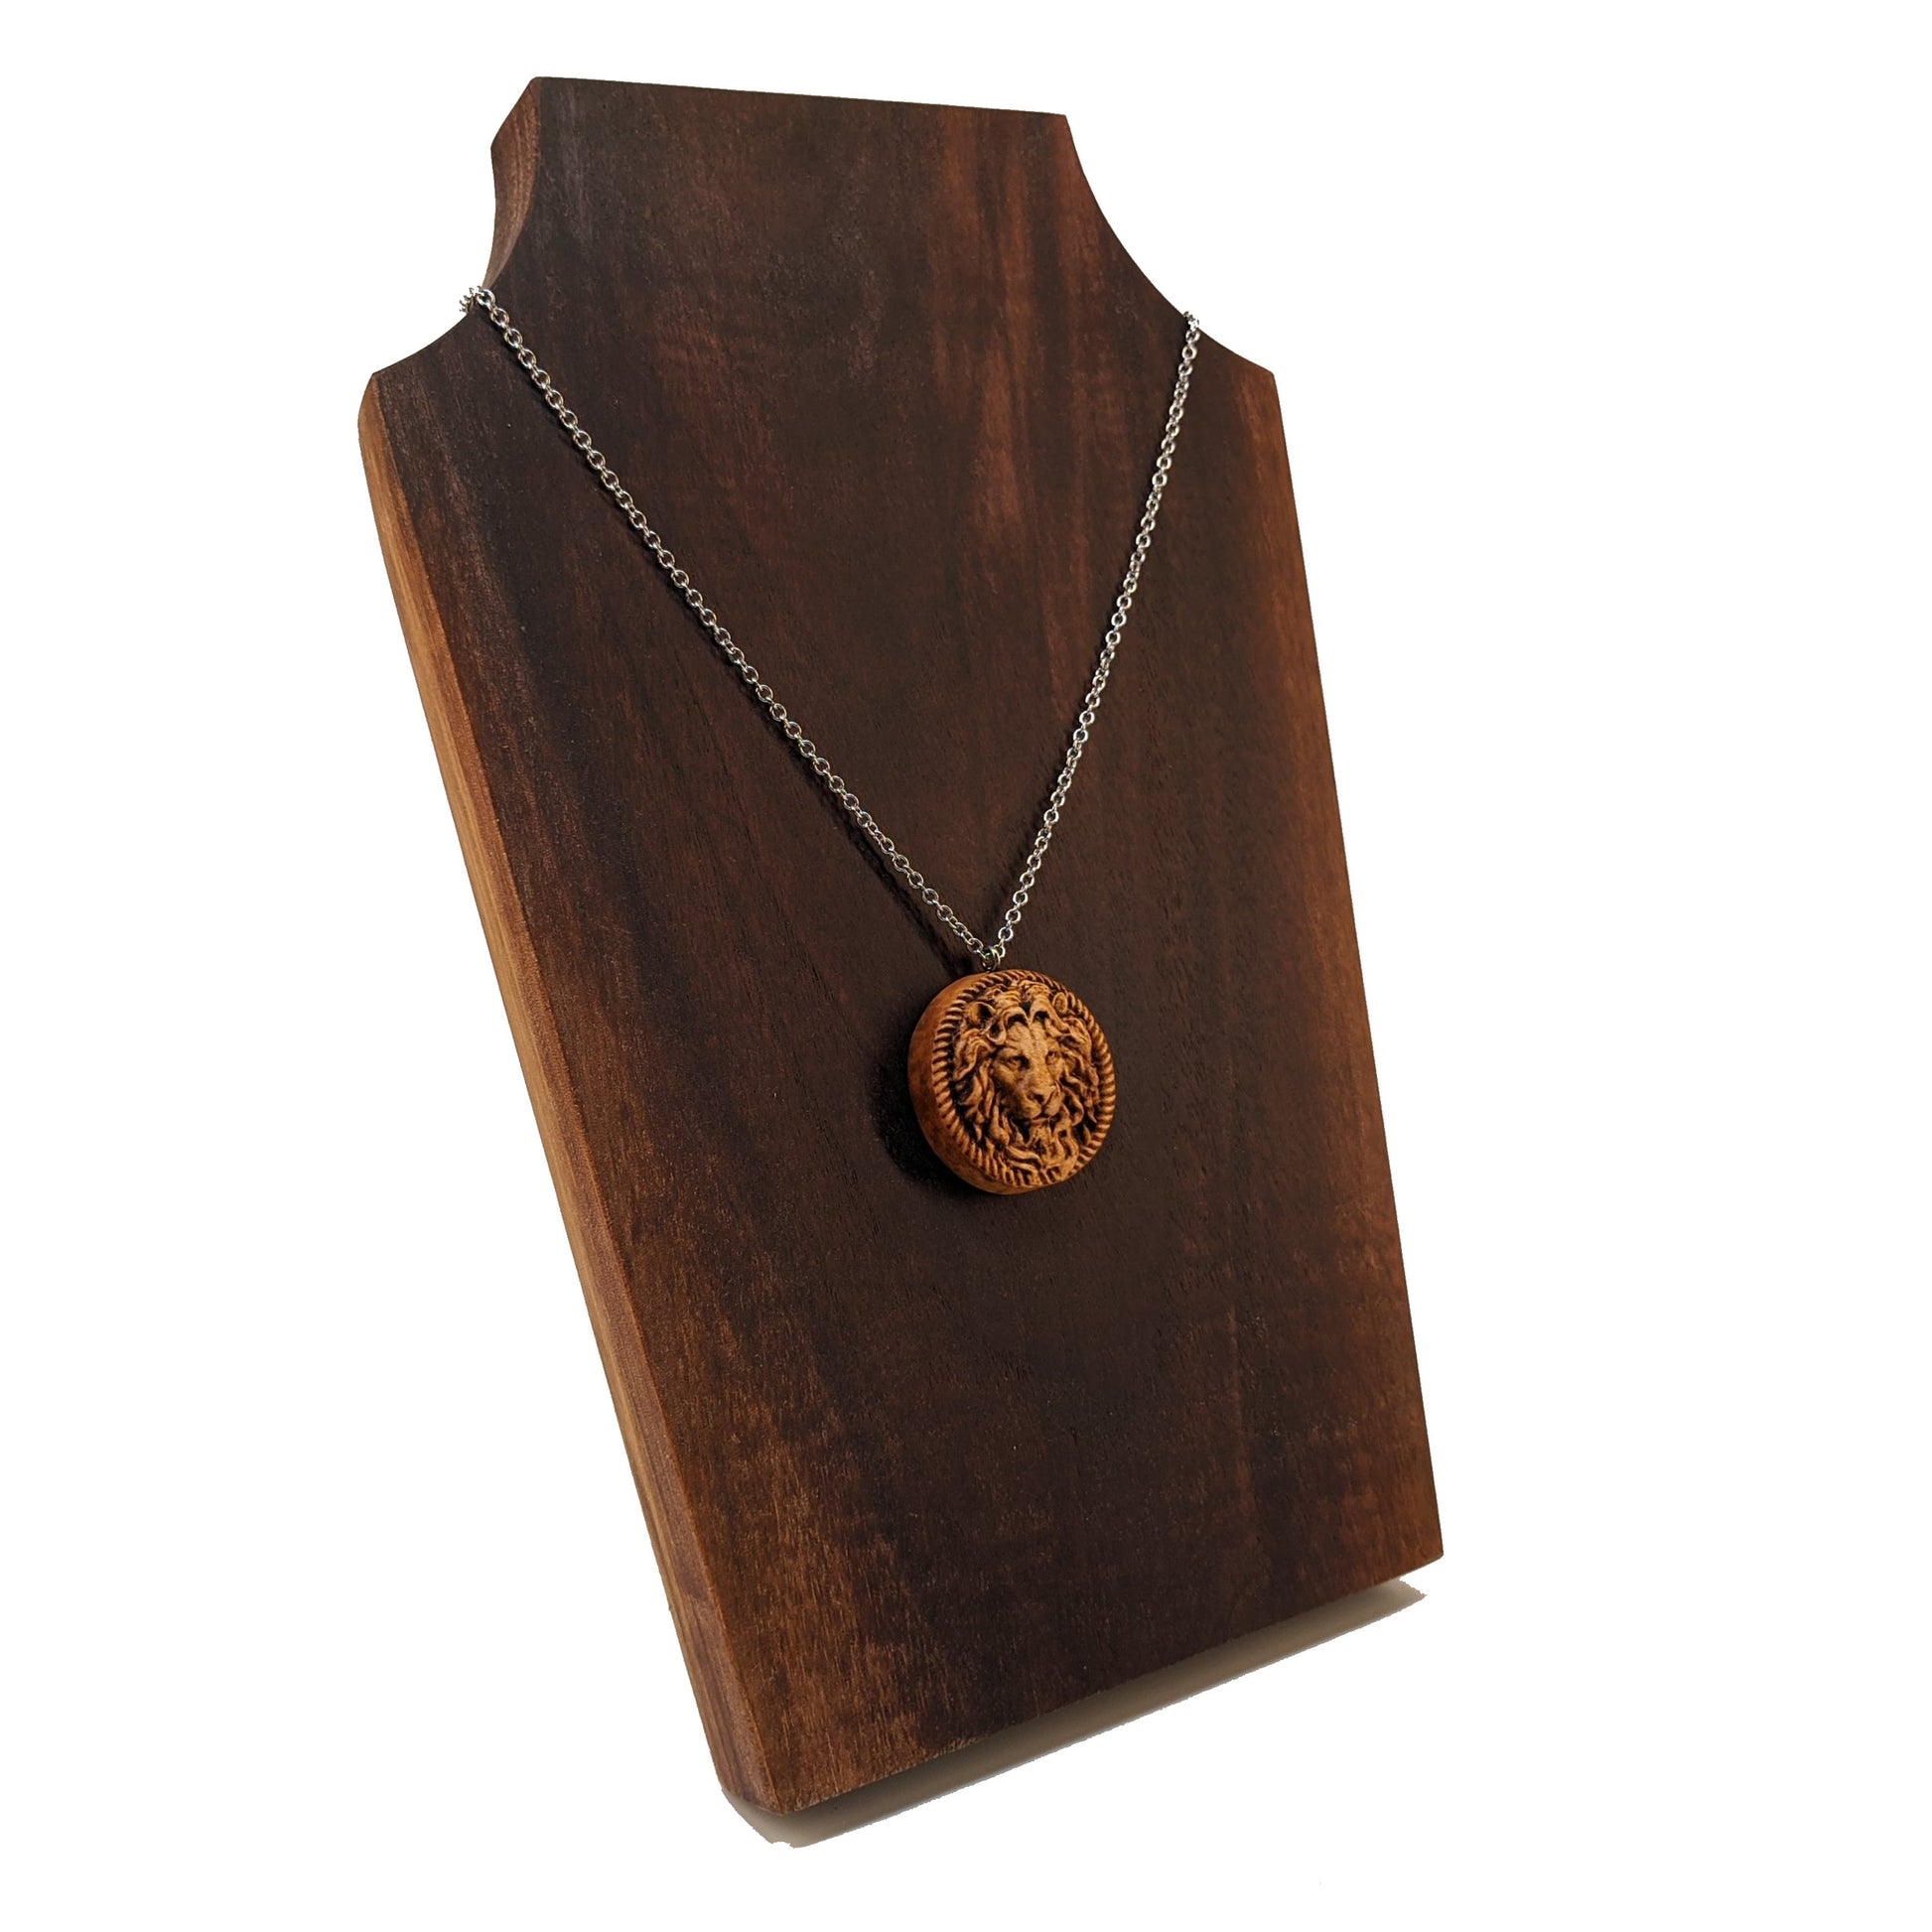 Wooden necklace pendant carved in the shape of a stern lion face surrounded by a rope border. Hanging from a silver stainless steel chain against a dark walnut wood background.